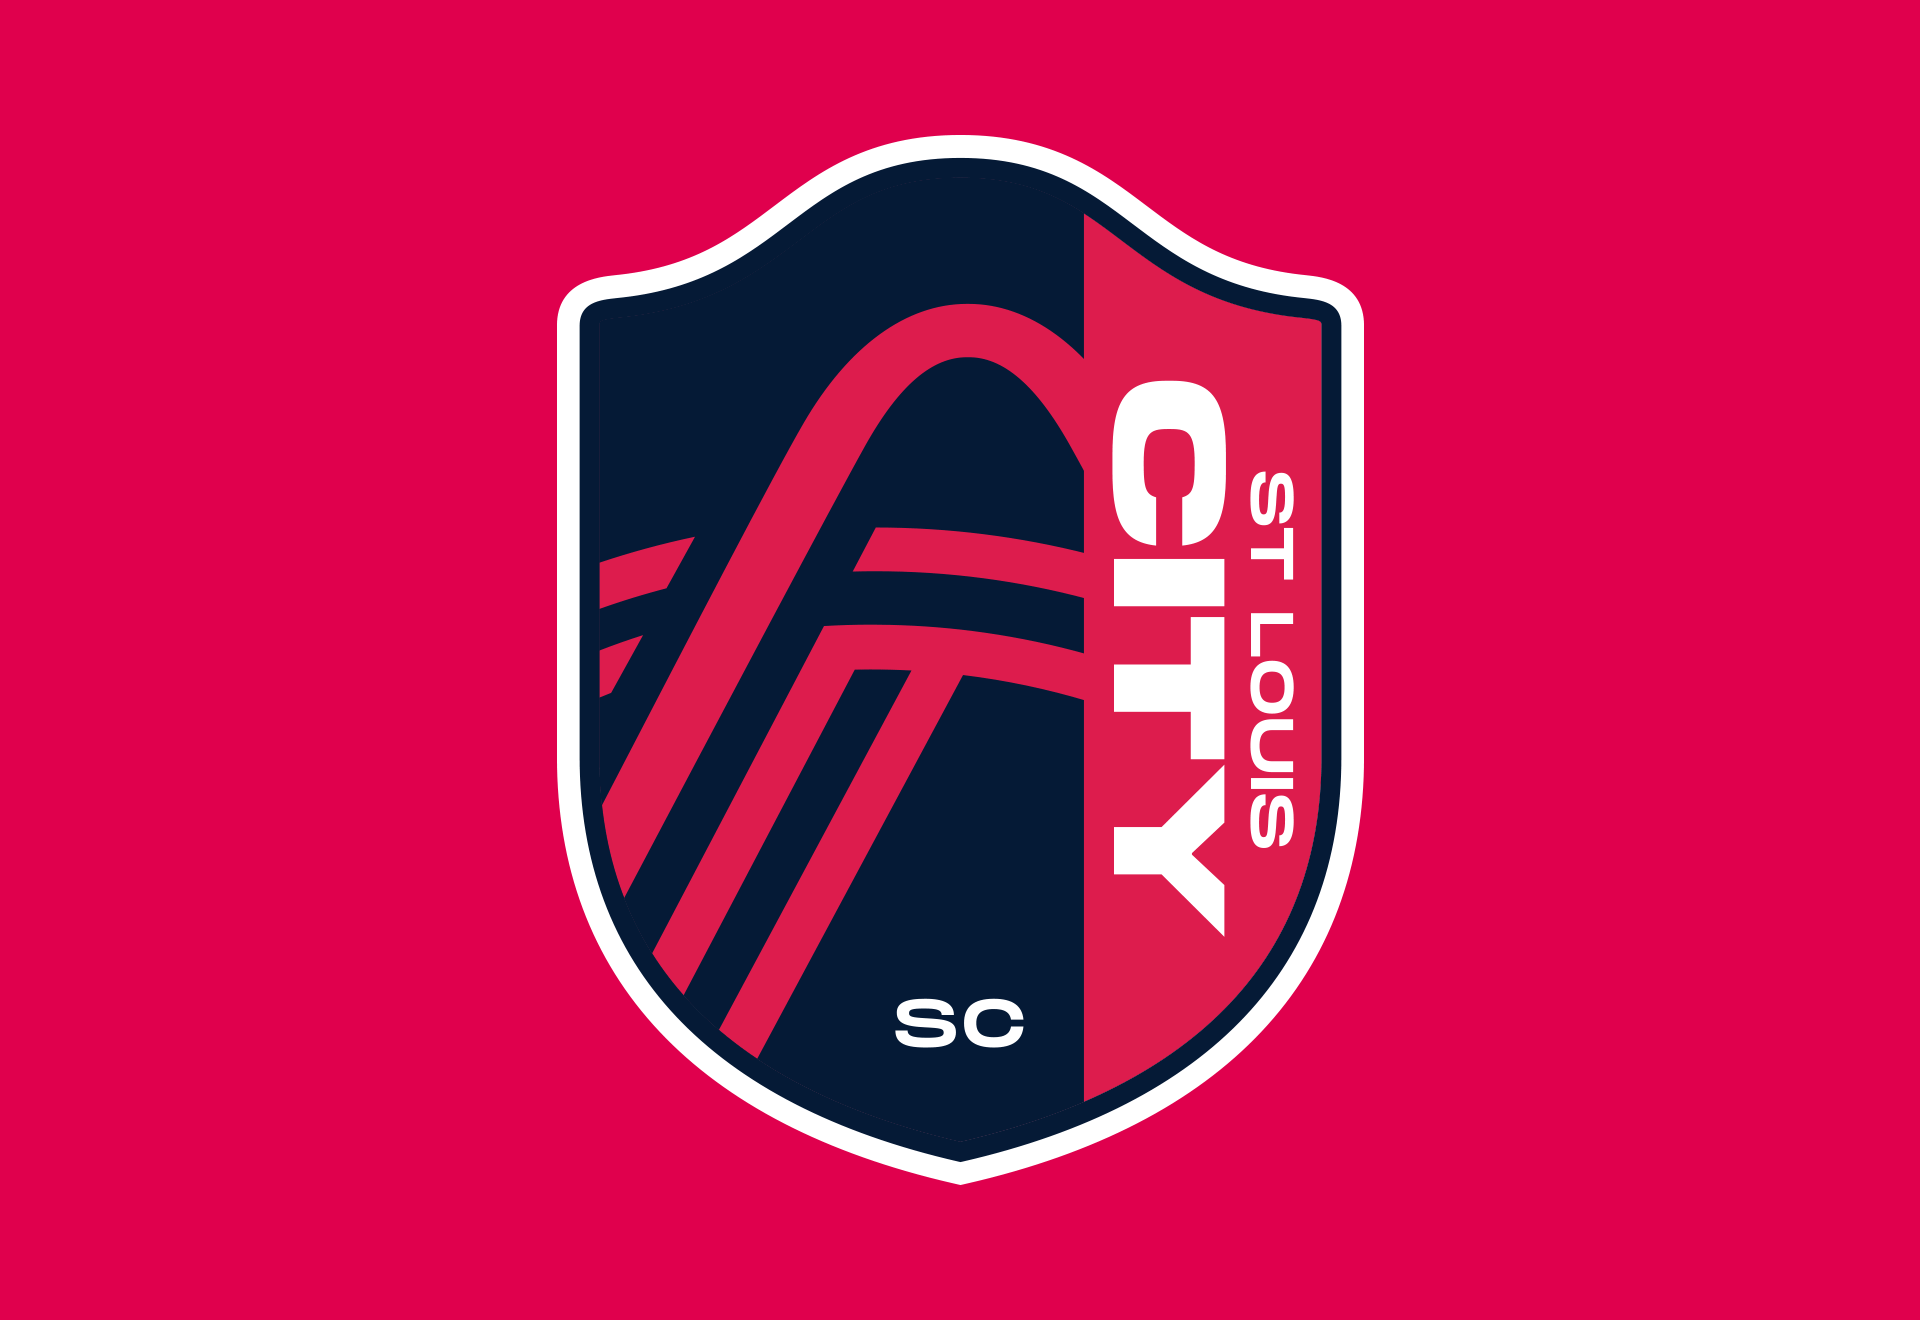 New Name and Logo for St. Louis City SC